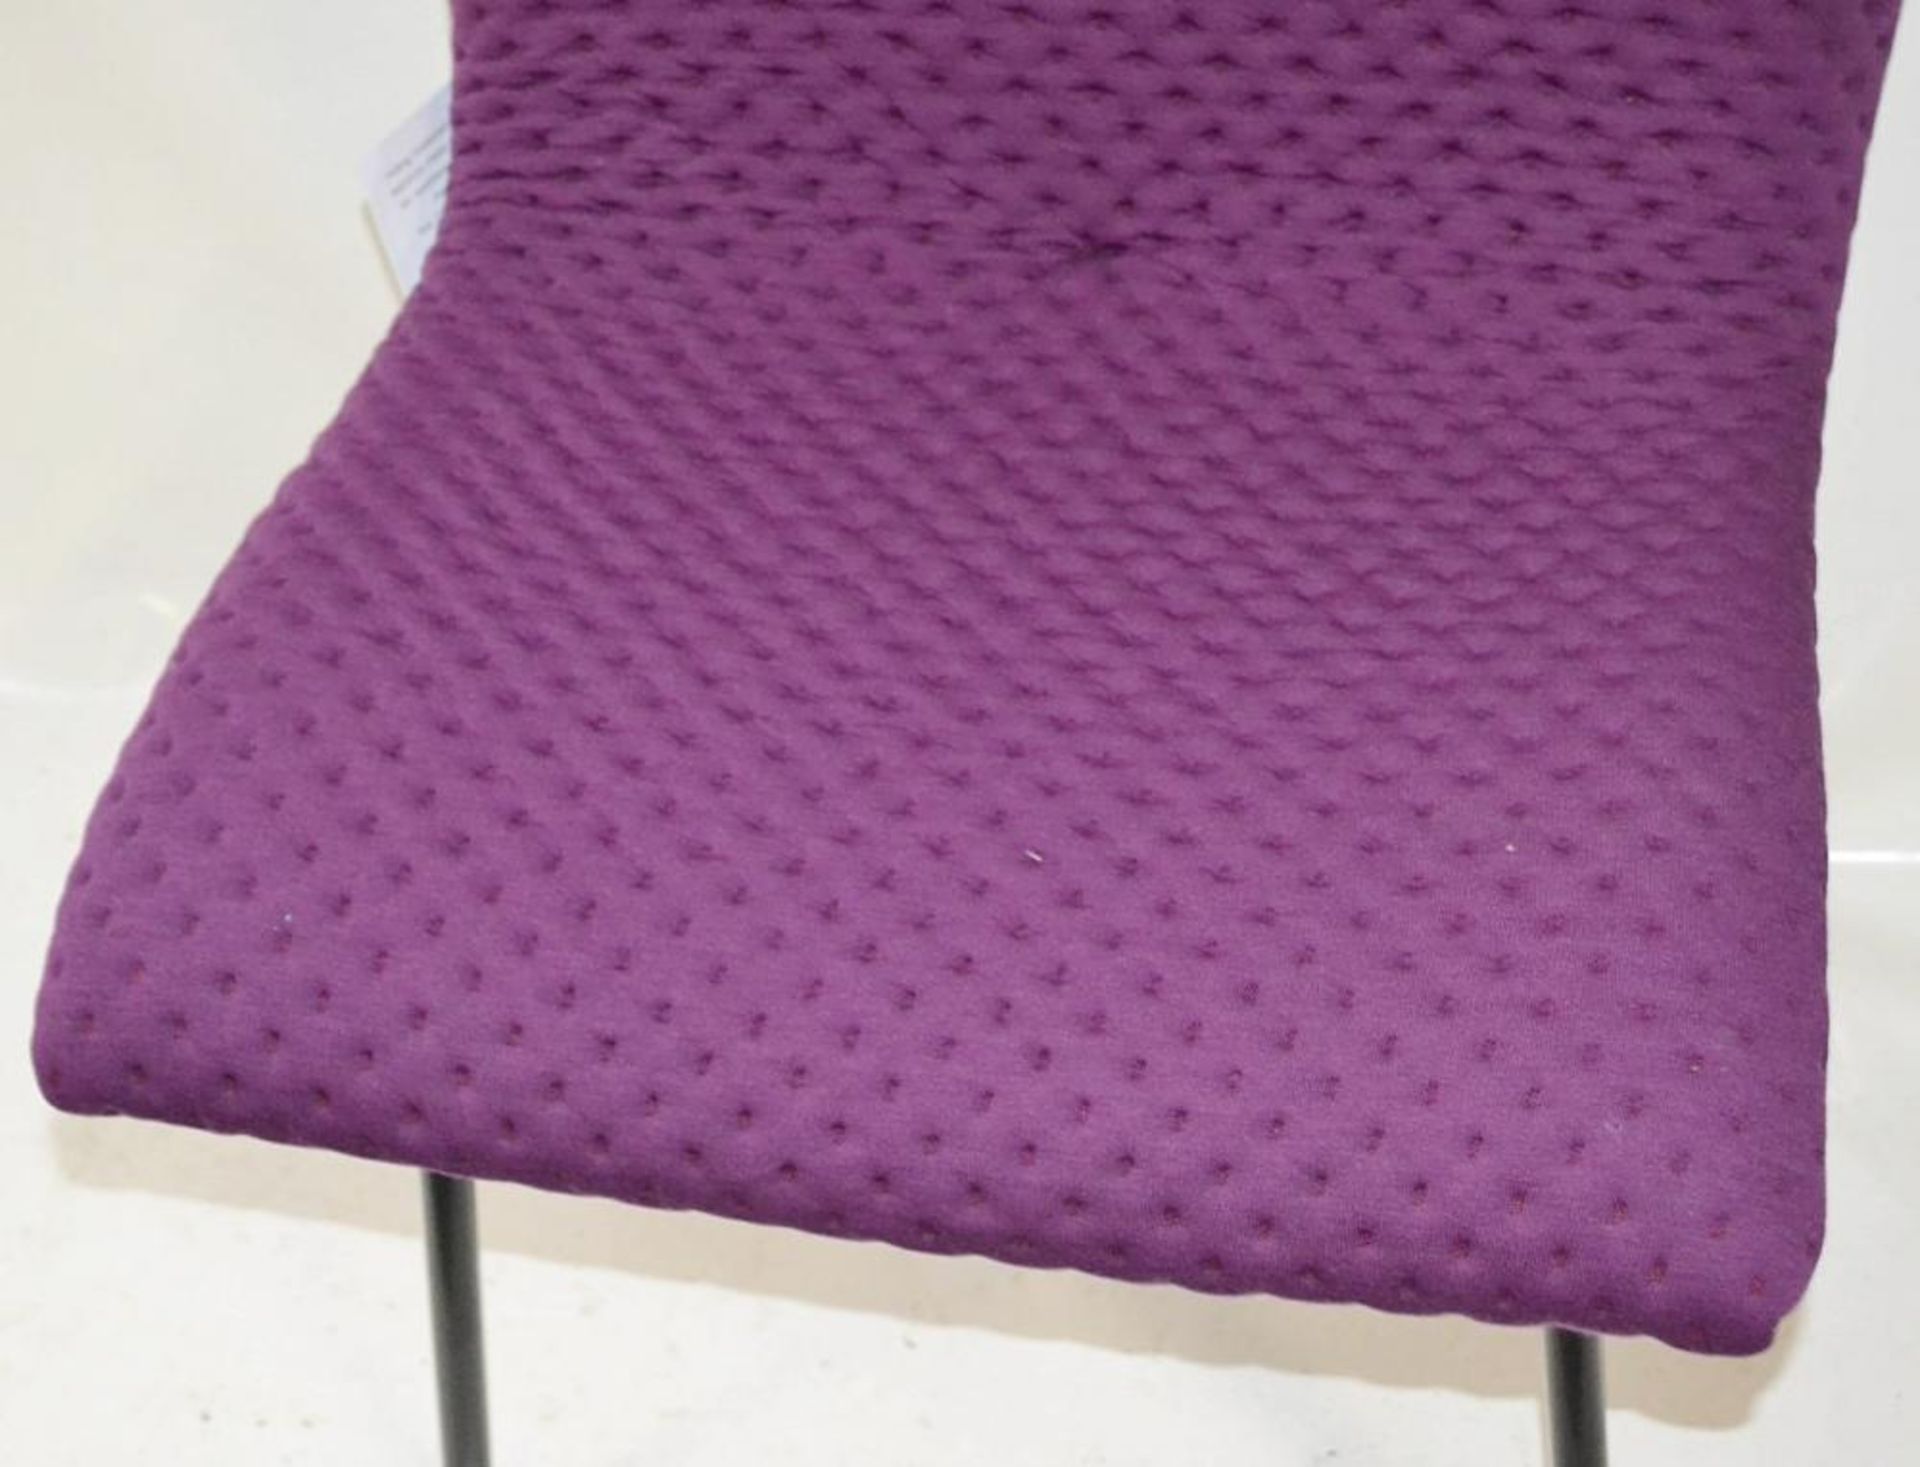 1 x Ligne Roset 'Calin' Chair - Features Bright Purple Upholsterey - Made In France - Ref: 6206608 P - Image 4 of 7